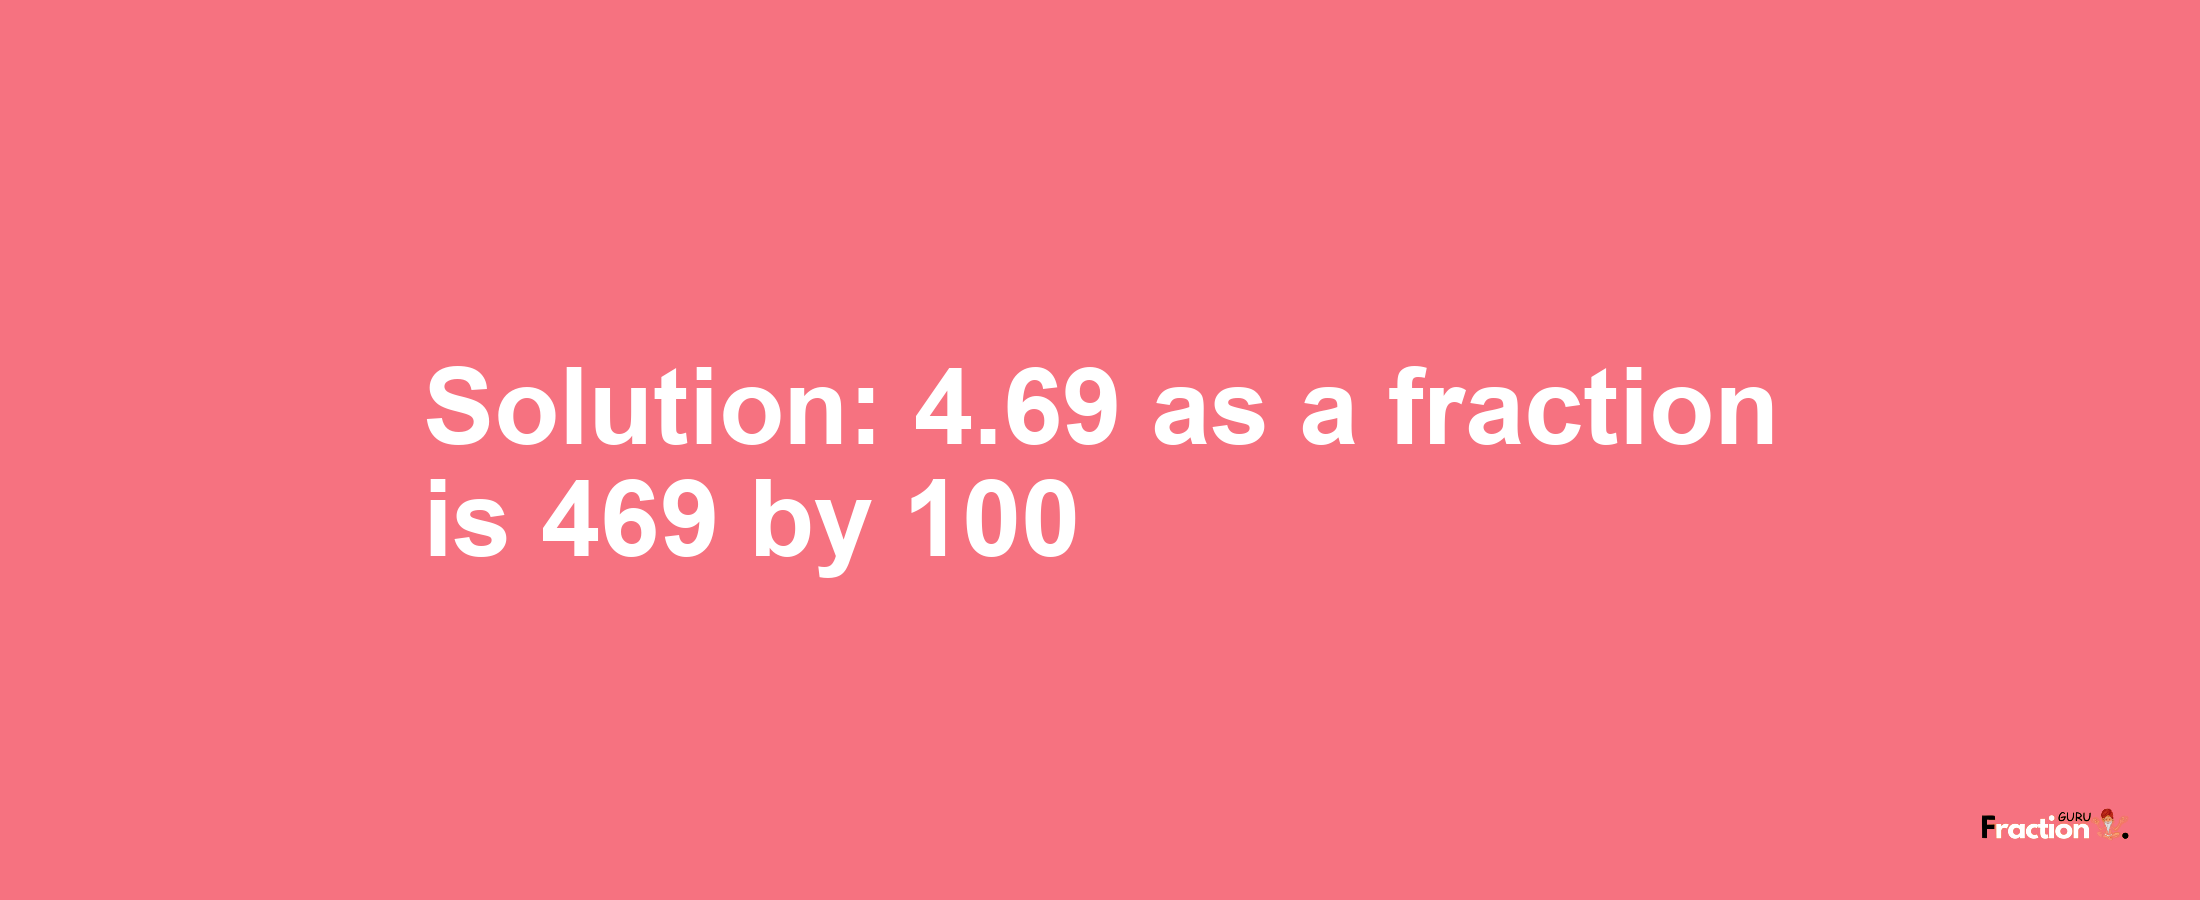 Solution:4.69 as a fraction is 469/100